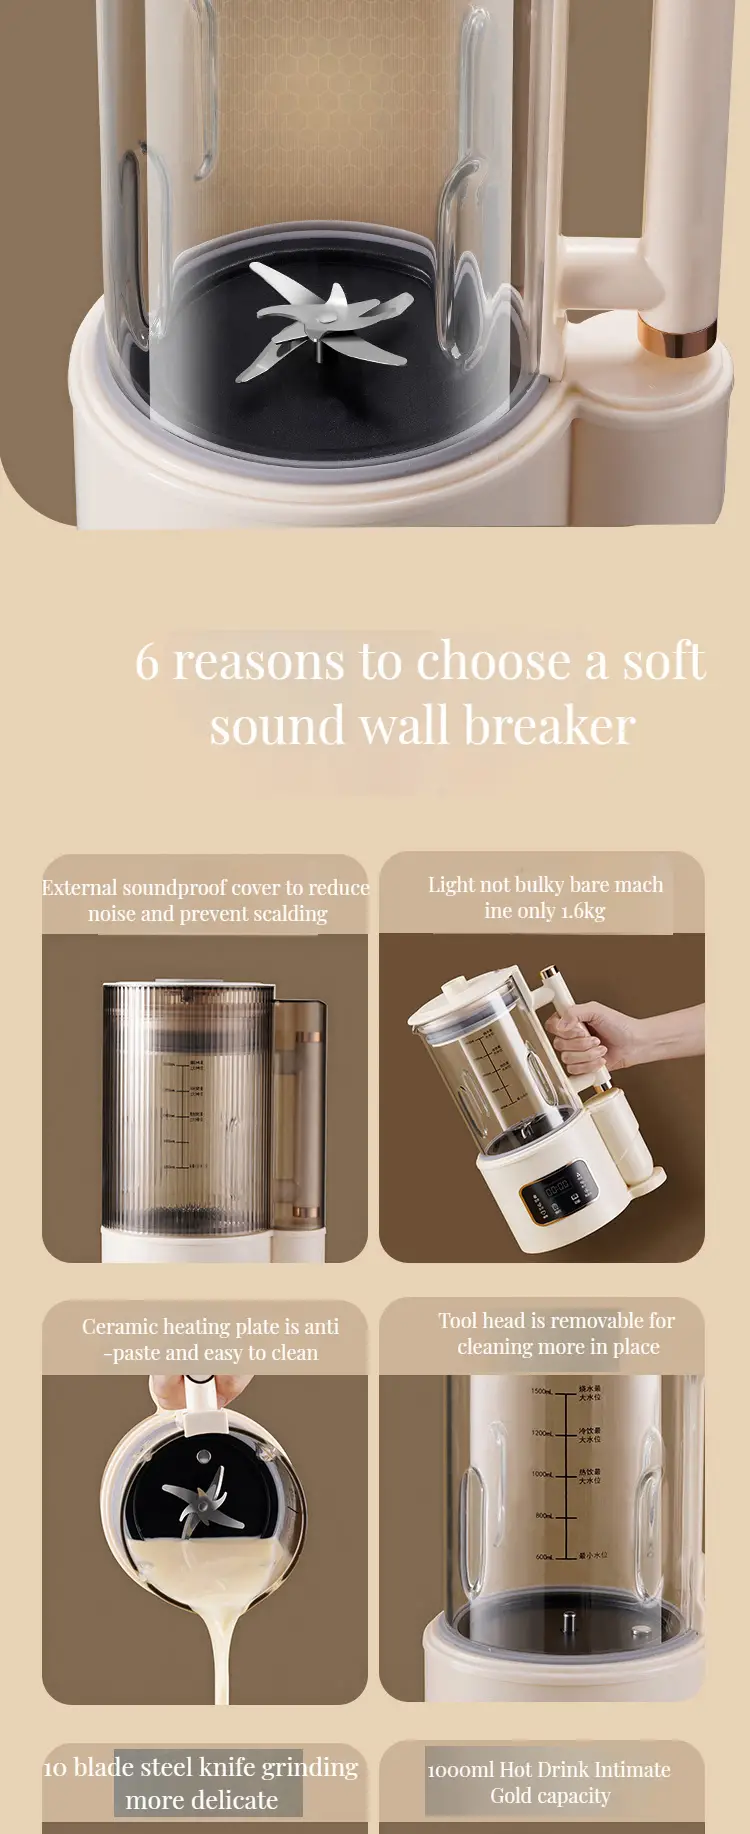 a bass wall breaker that can make a smoothie and a high boron glass cup for household heating automatic small soy milk machine food supplement machine silent soft sound multi functional blender with sound insulation cover details 11